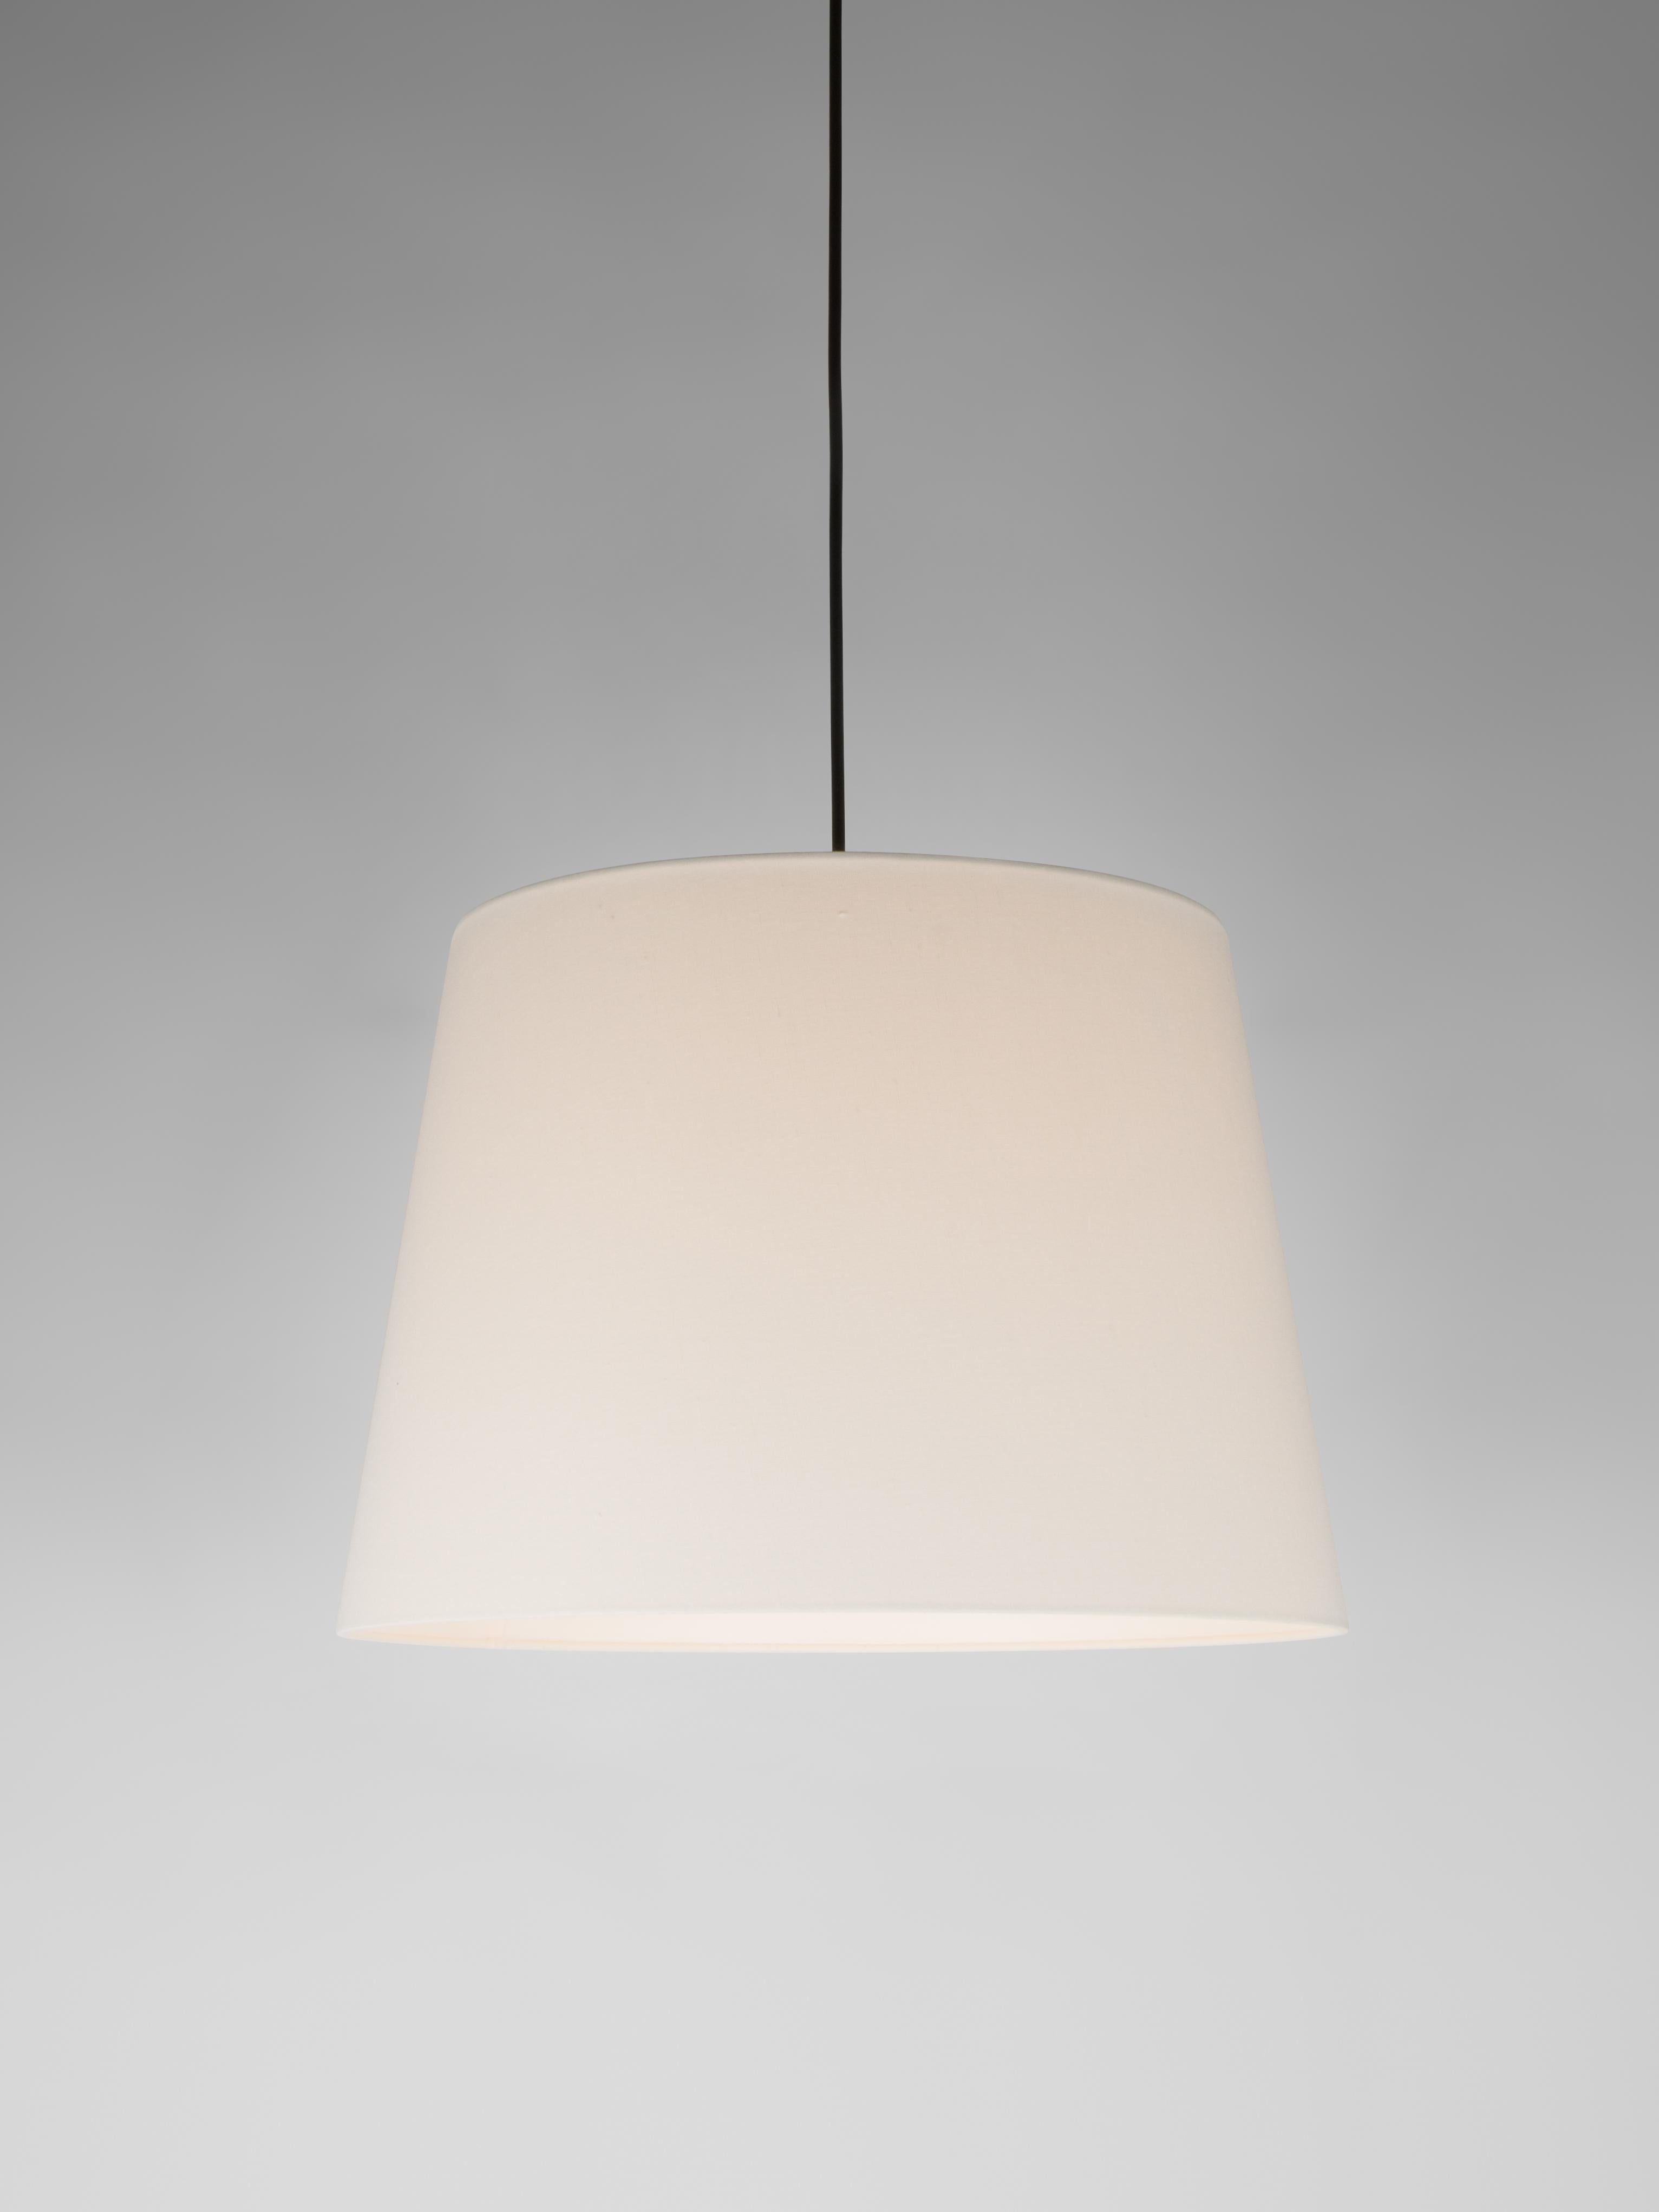 White Sísísí Cónicas GT1 pendant lamp by Santa & Cole
Dimensions: D 45 x H 32 cm
Materials: Metal, linen.
Available in other colors.
Also available in two lights version.

The conical shape group has multiple finishes and sizes. It consists of